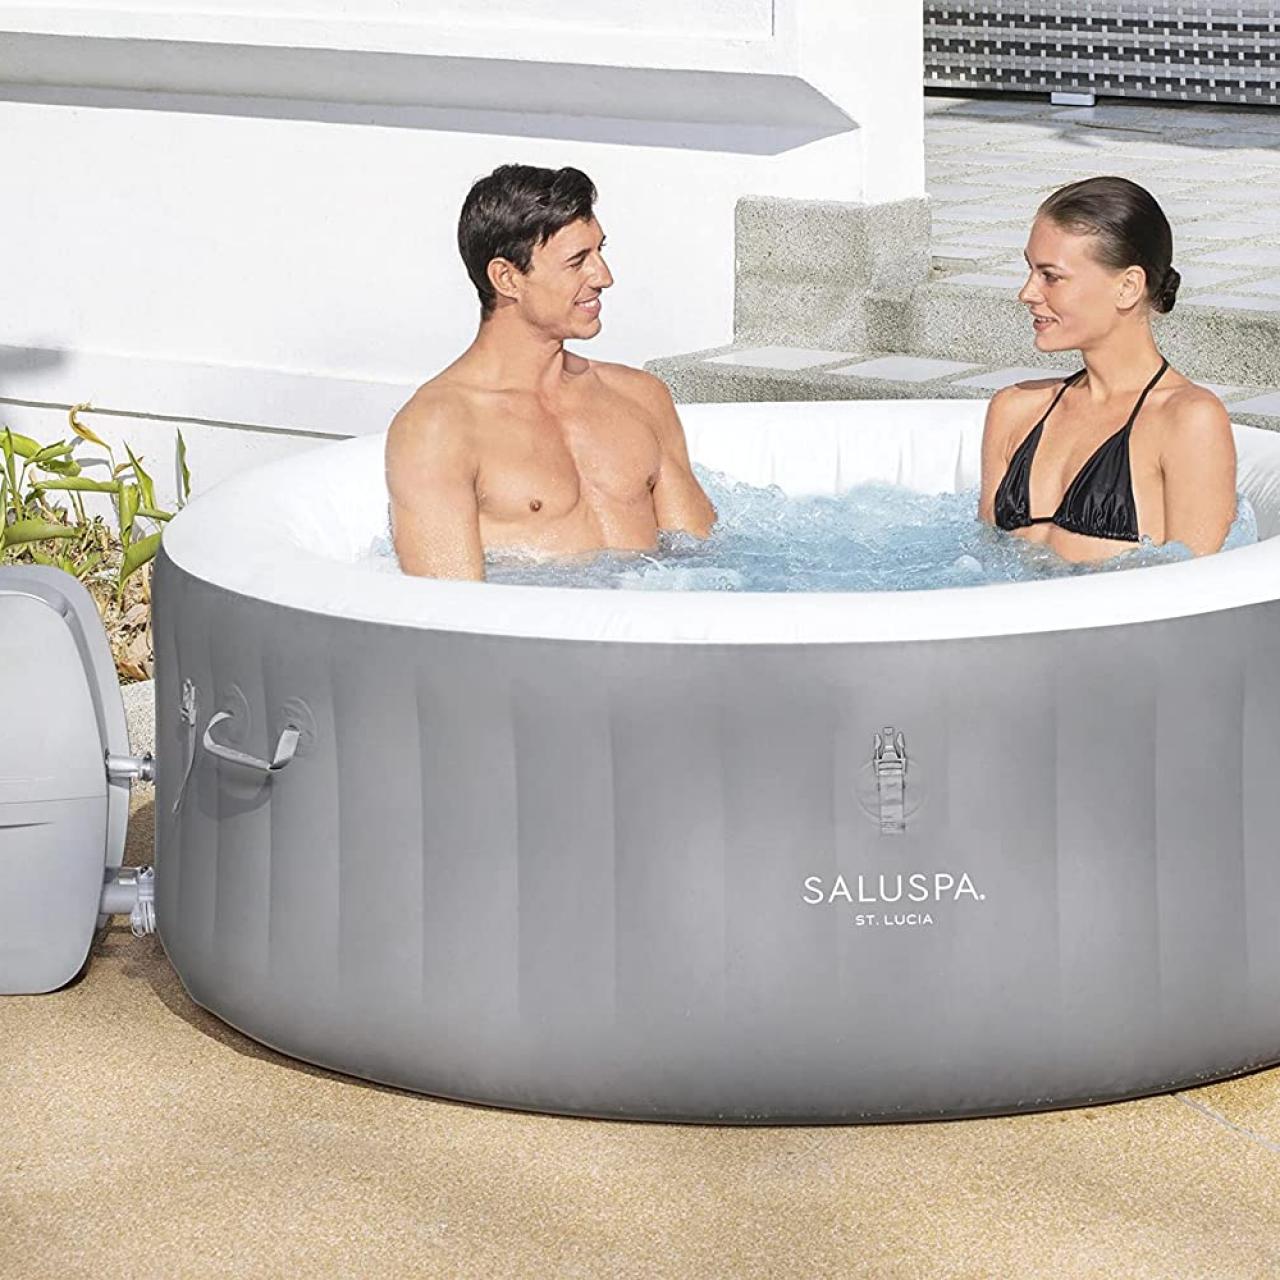 https://hgtvhome.sndimg.com/content/dam/images/hgtv/products/2023/5/3/rx_amazon_bestway-st-lucia-saluspa-2-to-3-person-inflatable-round-outdoor-hot-tub-.jpeg.rend.hgtvcom.1280.1280.suffix/1683139031707.jpeg